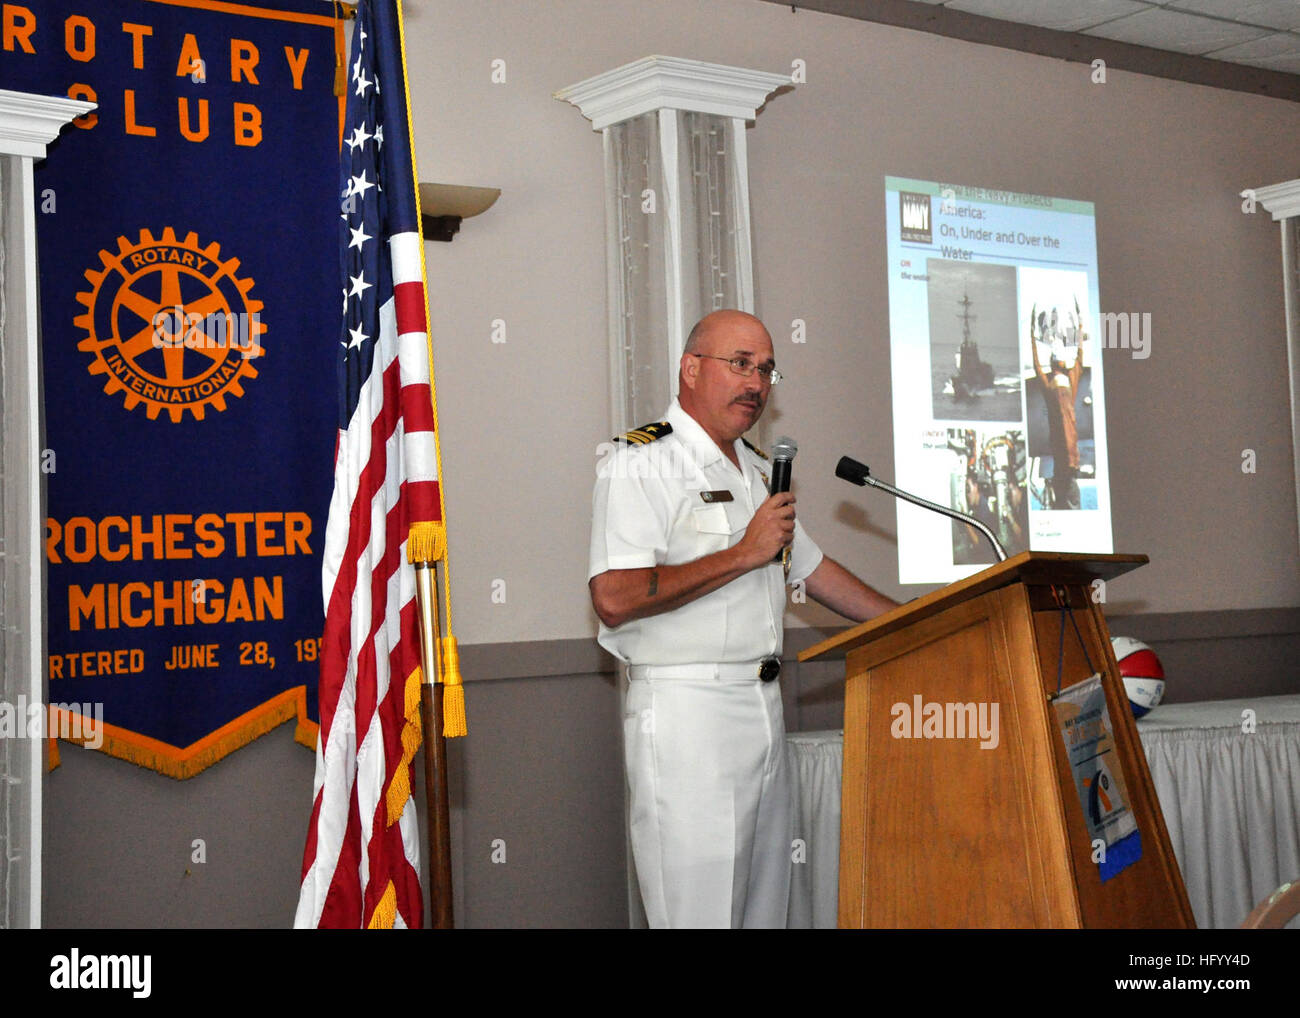 110719-N-VO219-002 ROCHESTER, Mich. (July 19, 2011) Cmdr. Richard Simpson, executive officer of Navy Recruiting District Michigan, delivers remarks to the Rochester Rotary Club during a Detroit Navy Week 2011 event. Detroit Navy Week is one of 21 Navy Weeks this year across the country. Navy Weeks are intended to showcase the investment Americans have made in their Navy and increase awareness in cities that do not have a significant Navy presence. (U.S. Navy photo by Mass Communication Specialist 1st Class Joseph R. Wax/Released) US Navy 110719-N-VO219-002 Cmdr. Richard Simpson, executive offi Stock Photo